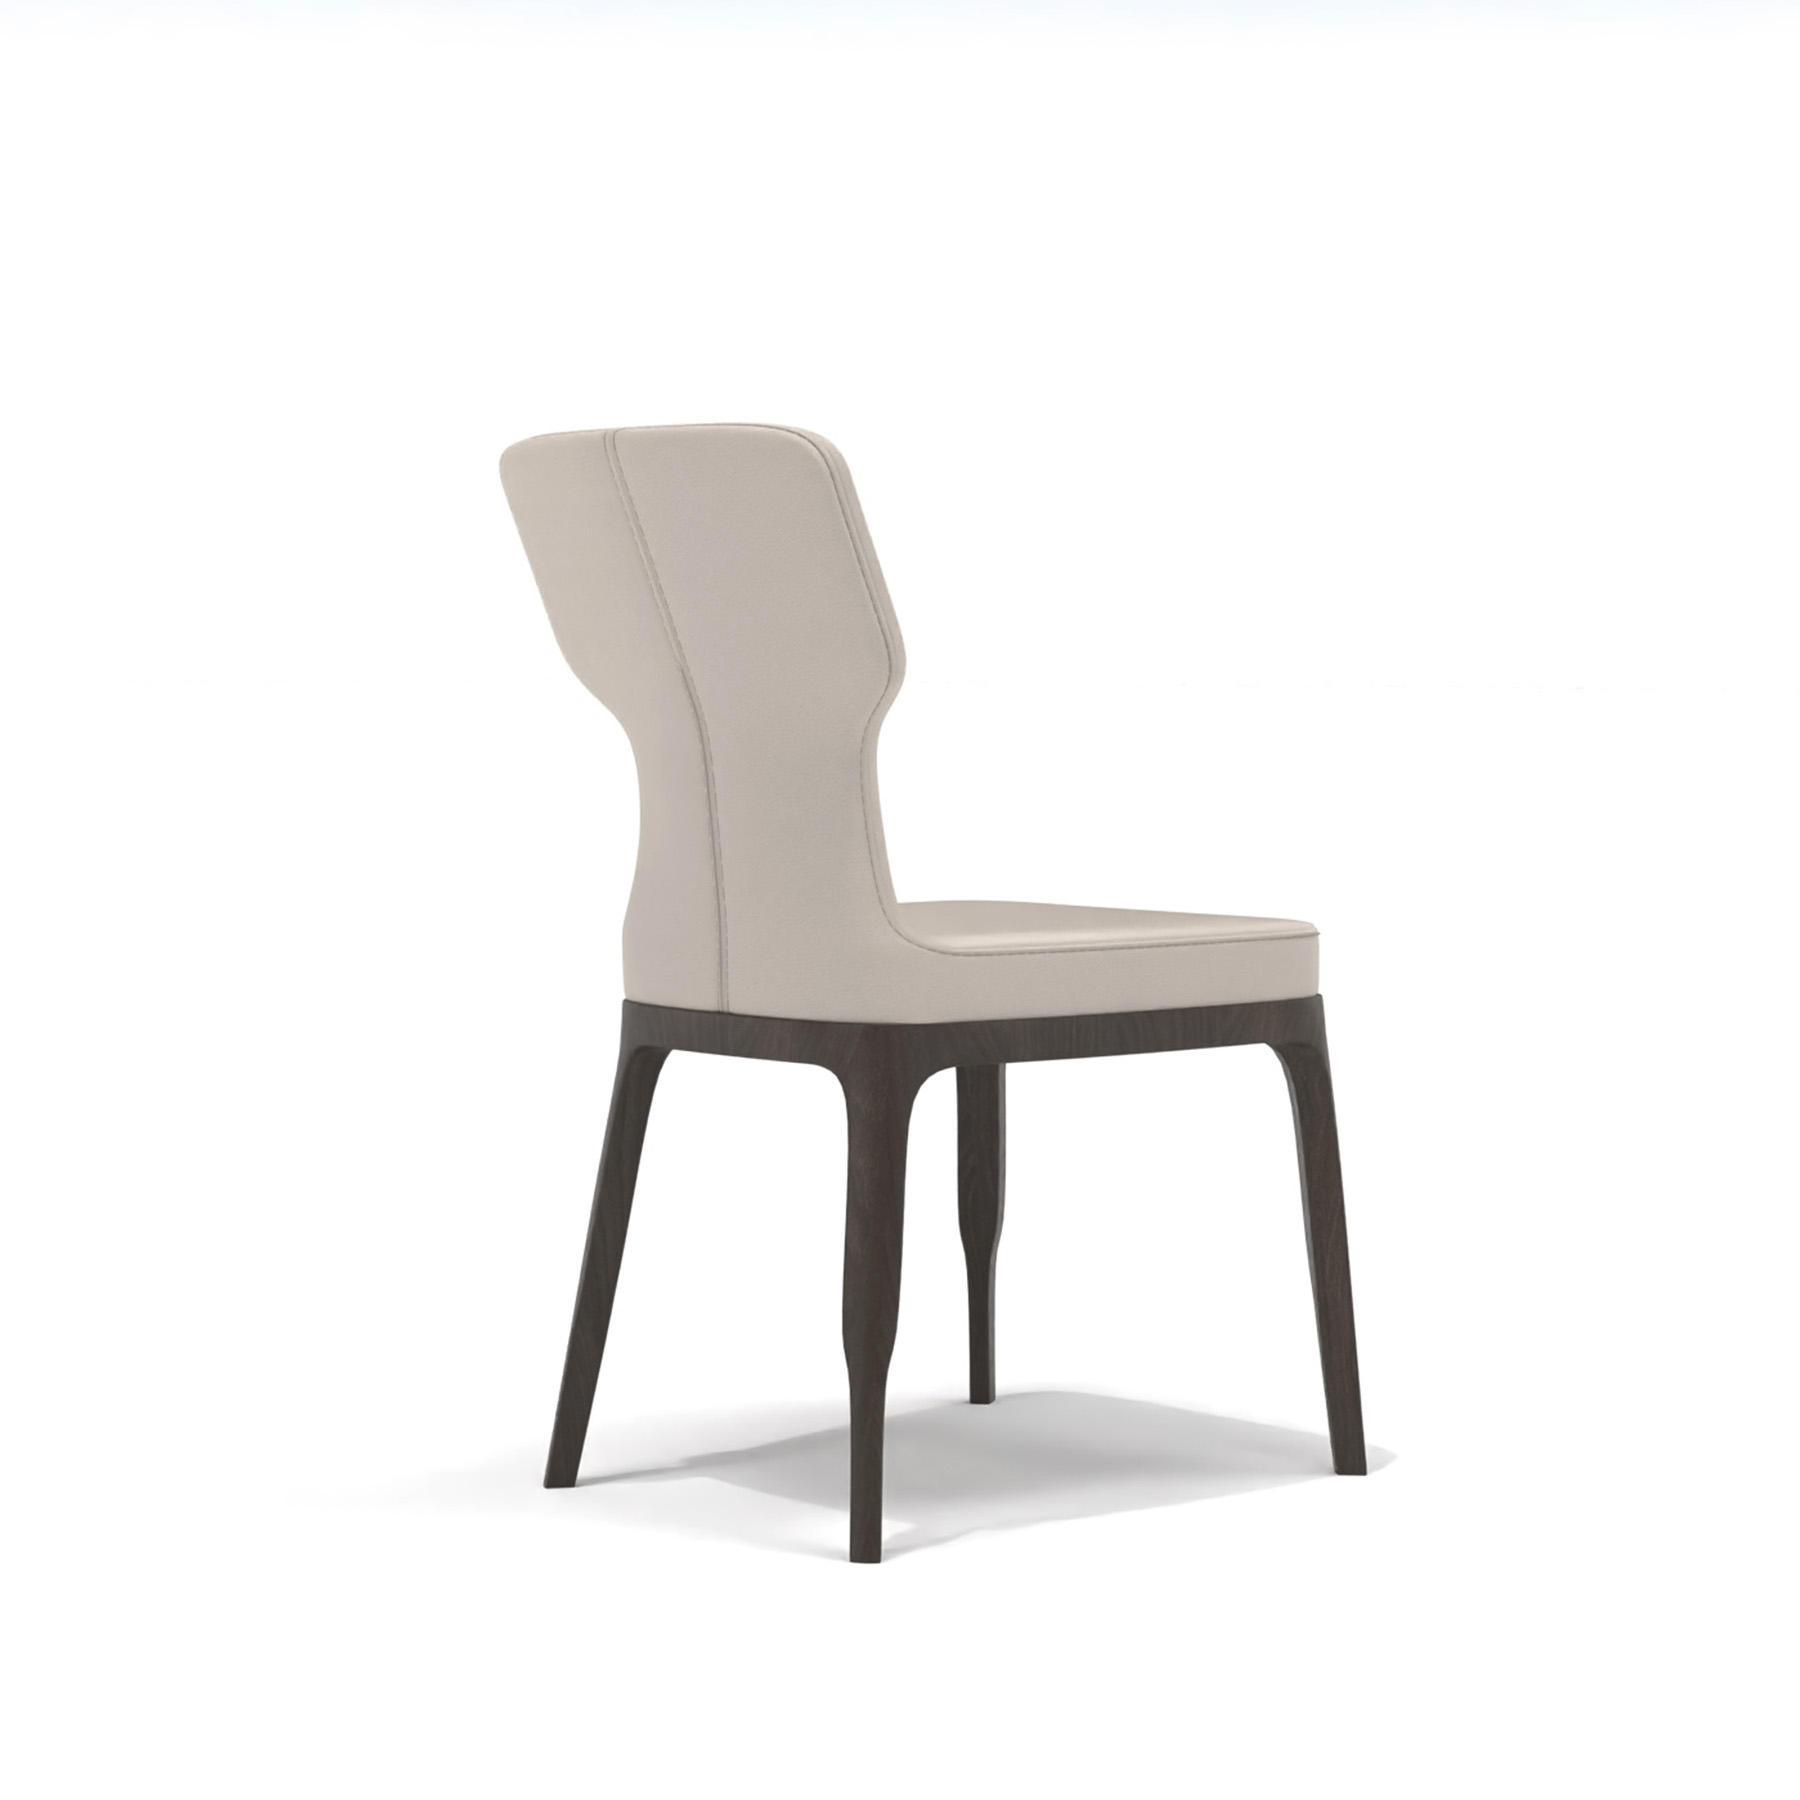 T shape high-end dining chair with solid wooden legs and beige leather t-montreal dining chair white background picture